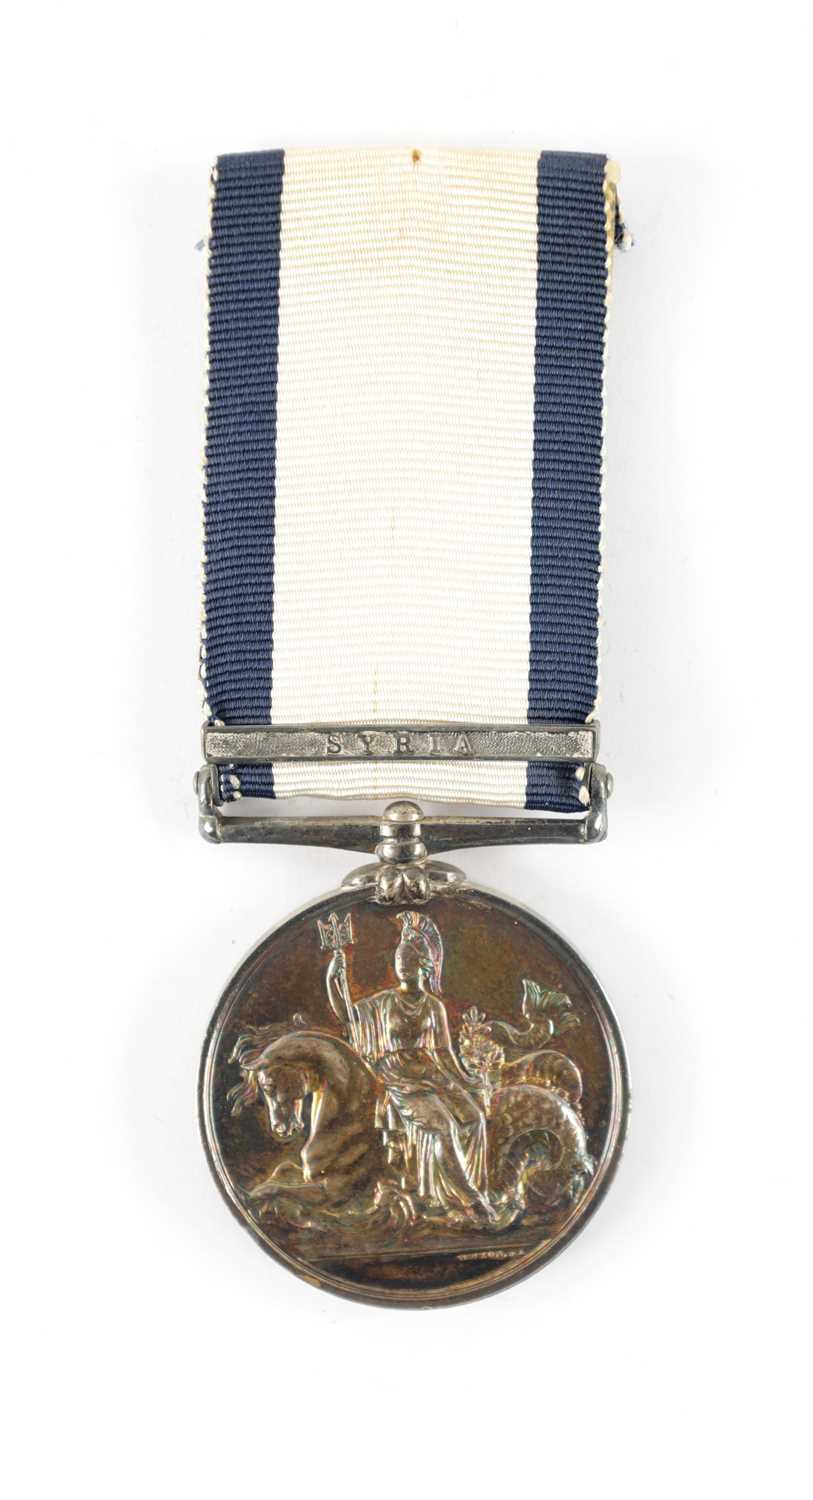 Lot 898 - A NAVAL GENERAL SERVICE 1793-1840 WITH ‘SYRIA’ CLASP